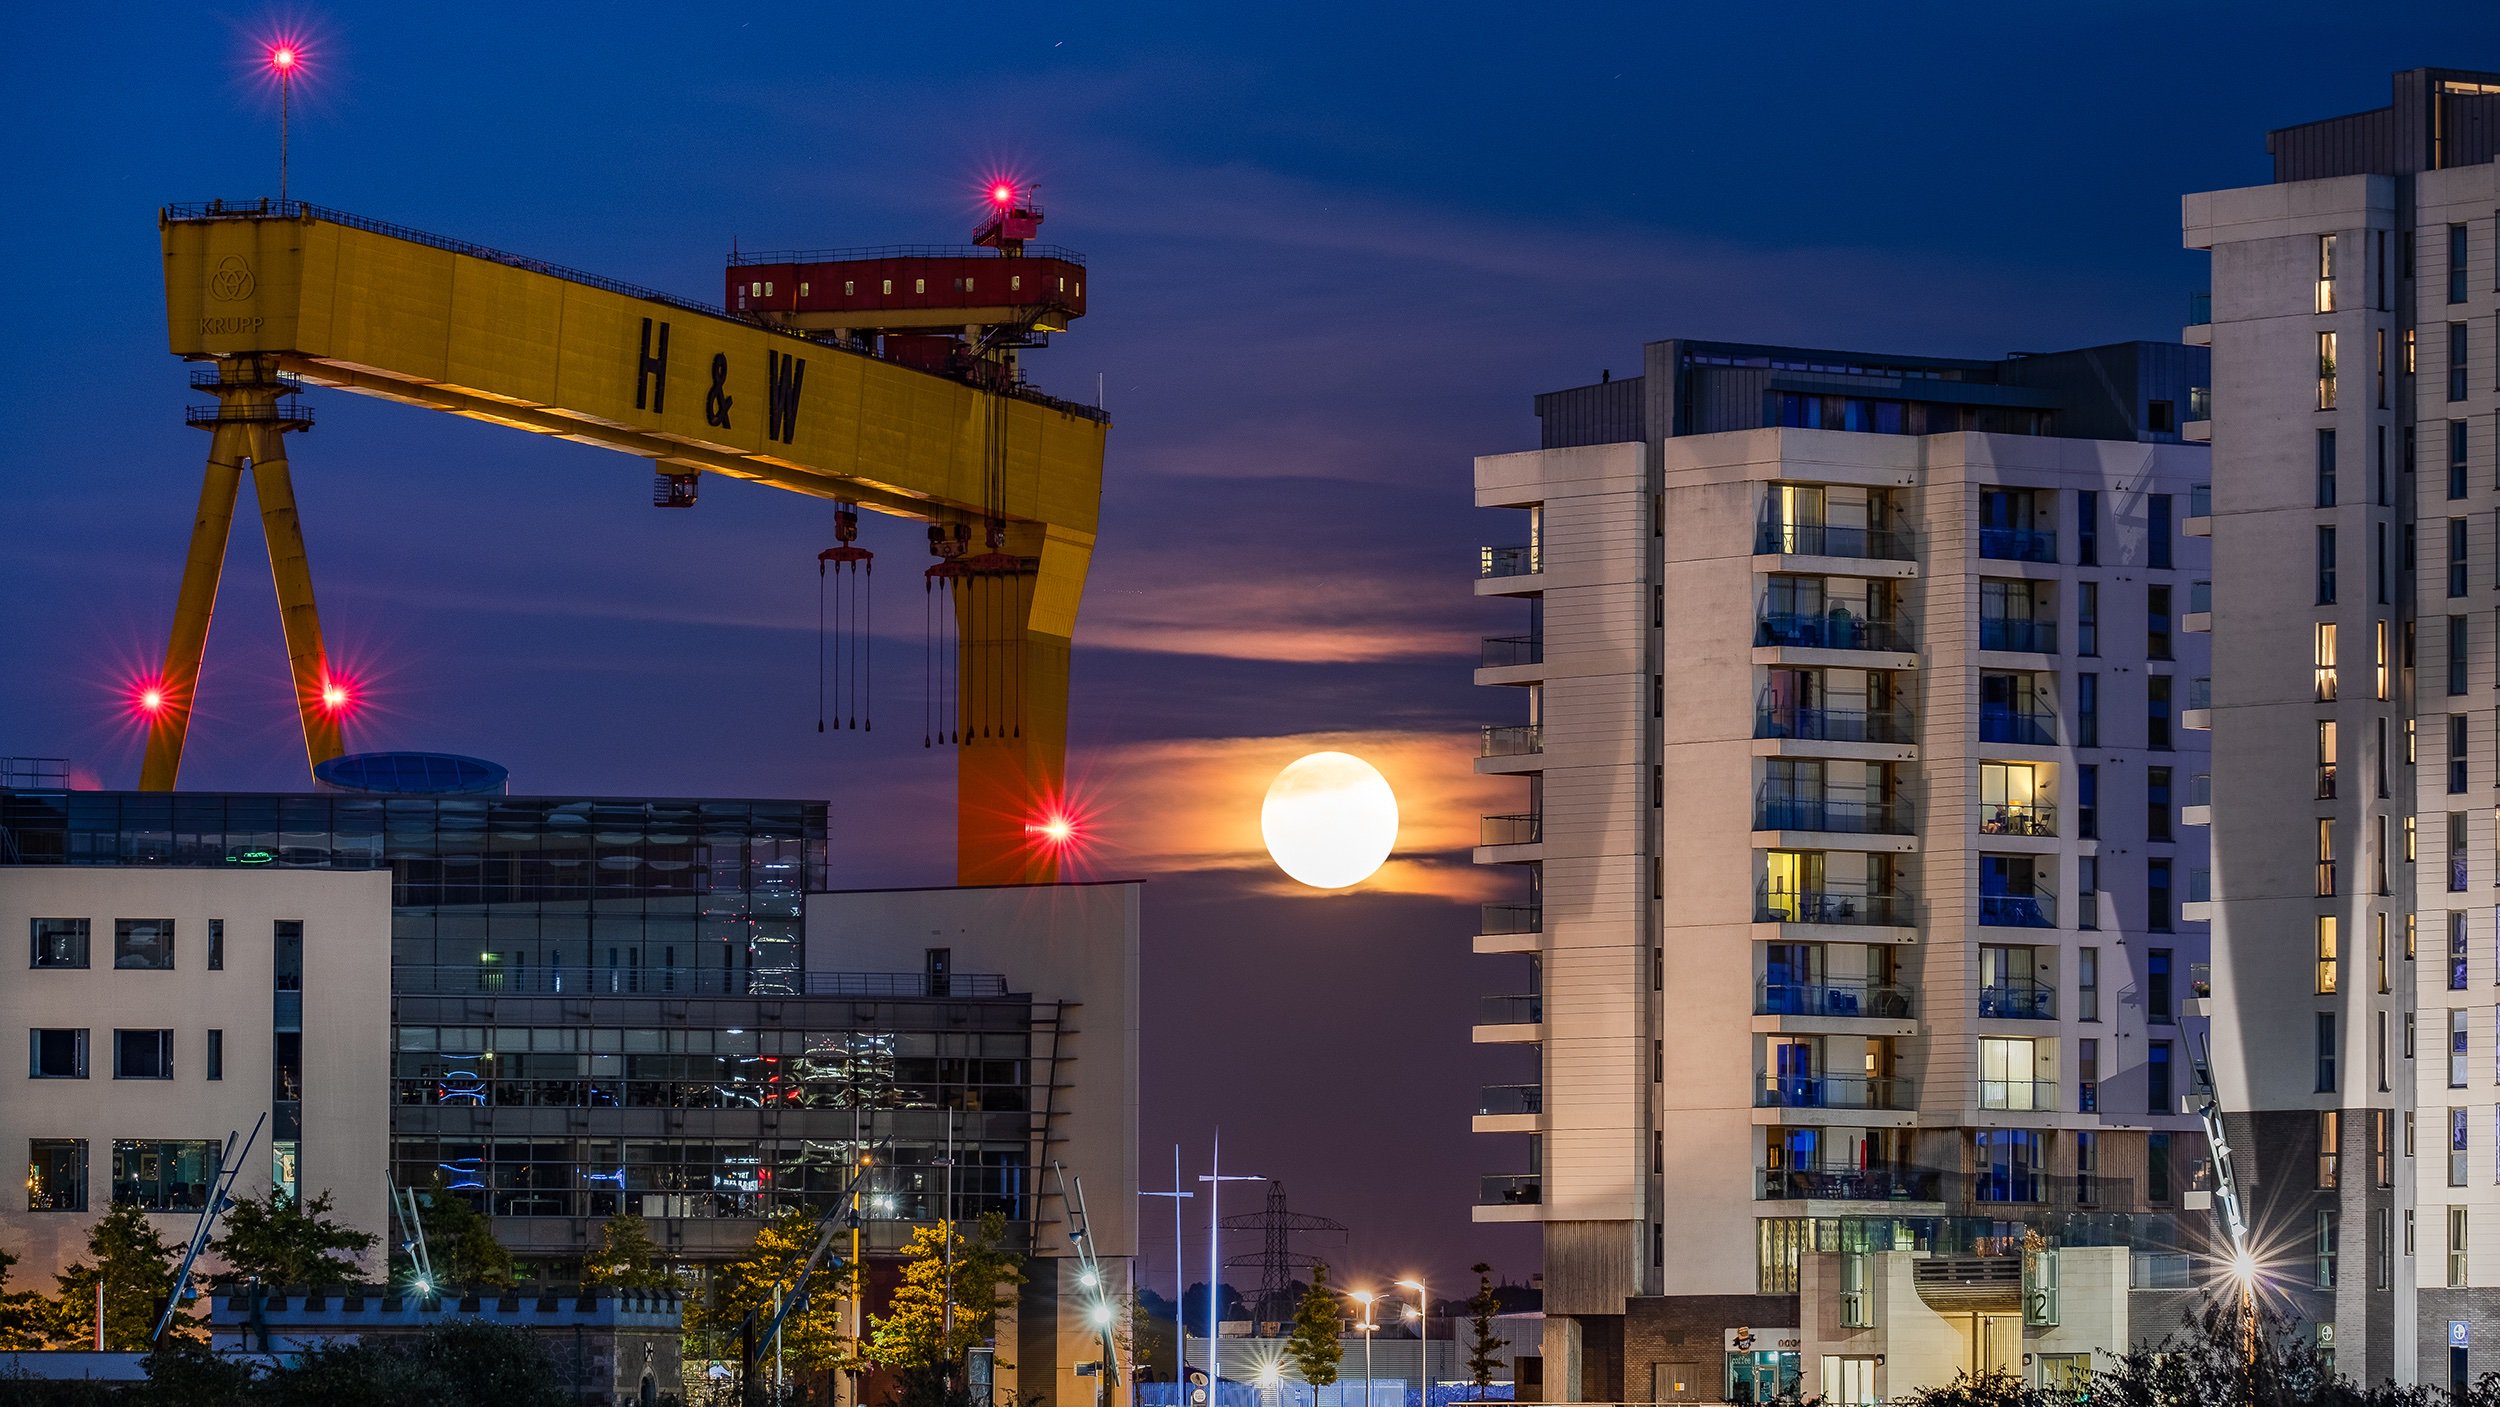 The Harvest Moon rising next to Harland & Wolff's Goliath at Titanic Quarter Belfast by Stephen Henderson @Social_Stephen